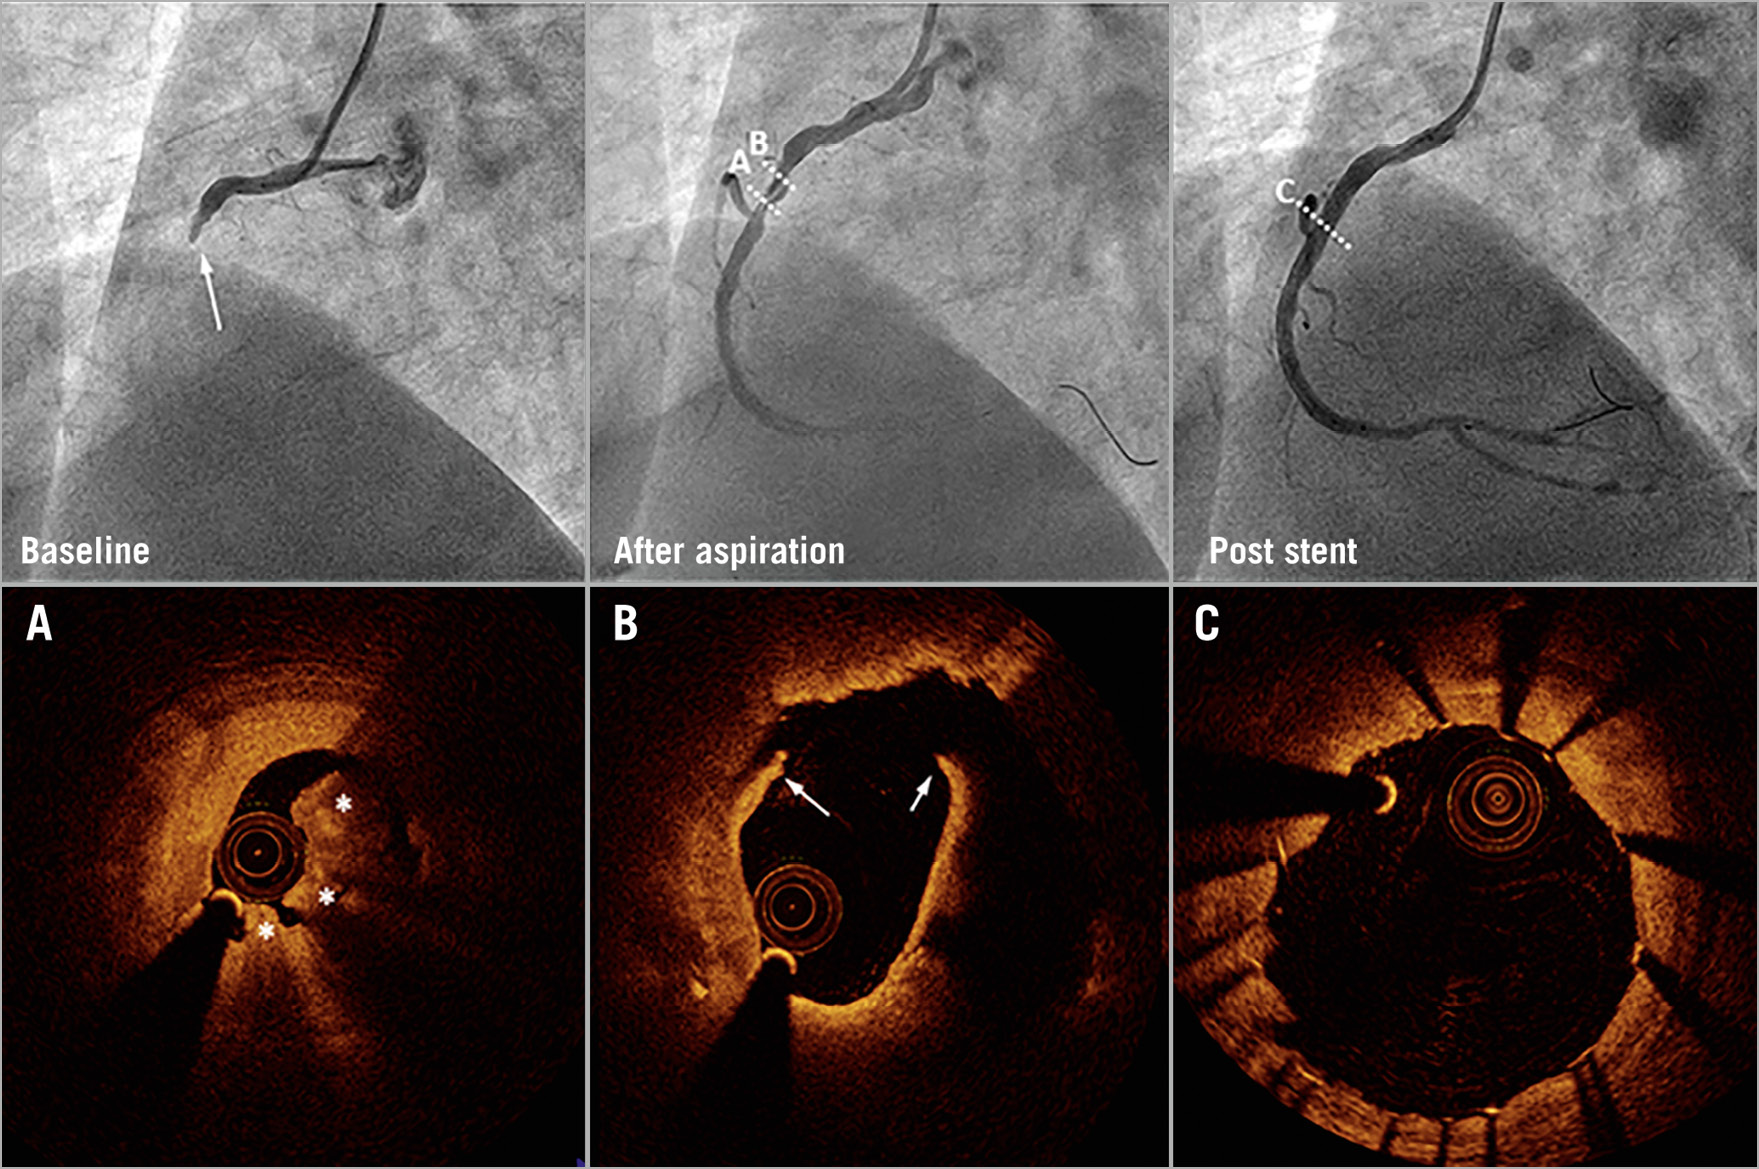 Figure 3. Coronary angiography and optical coherence tomography in a control patient. Baseline angiography (upper left) shows a patient with complete occlusion and TIMI 0 flow. After thrombus aspiration, the coronary arterial flow was restored to TIMI 3 flow. Optical coherence tomography (OCT) shows plaque rupture (white arrows) and red thrombus (white stars) (A & B). Angiography and OCT show imaging of the region after stent implantation (C).